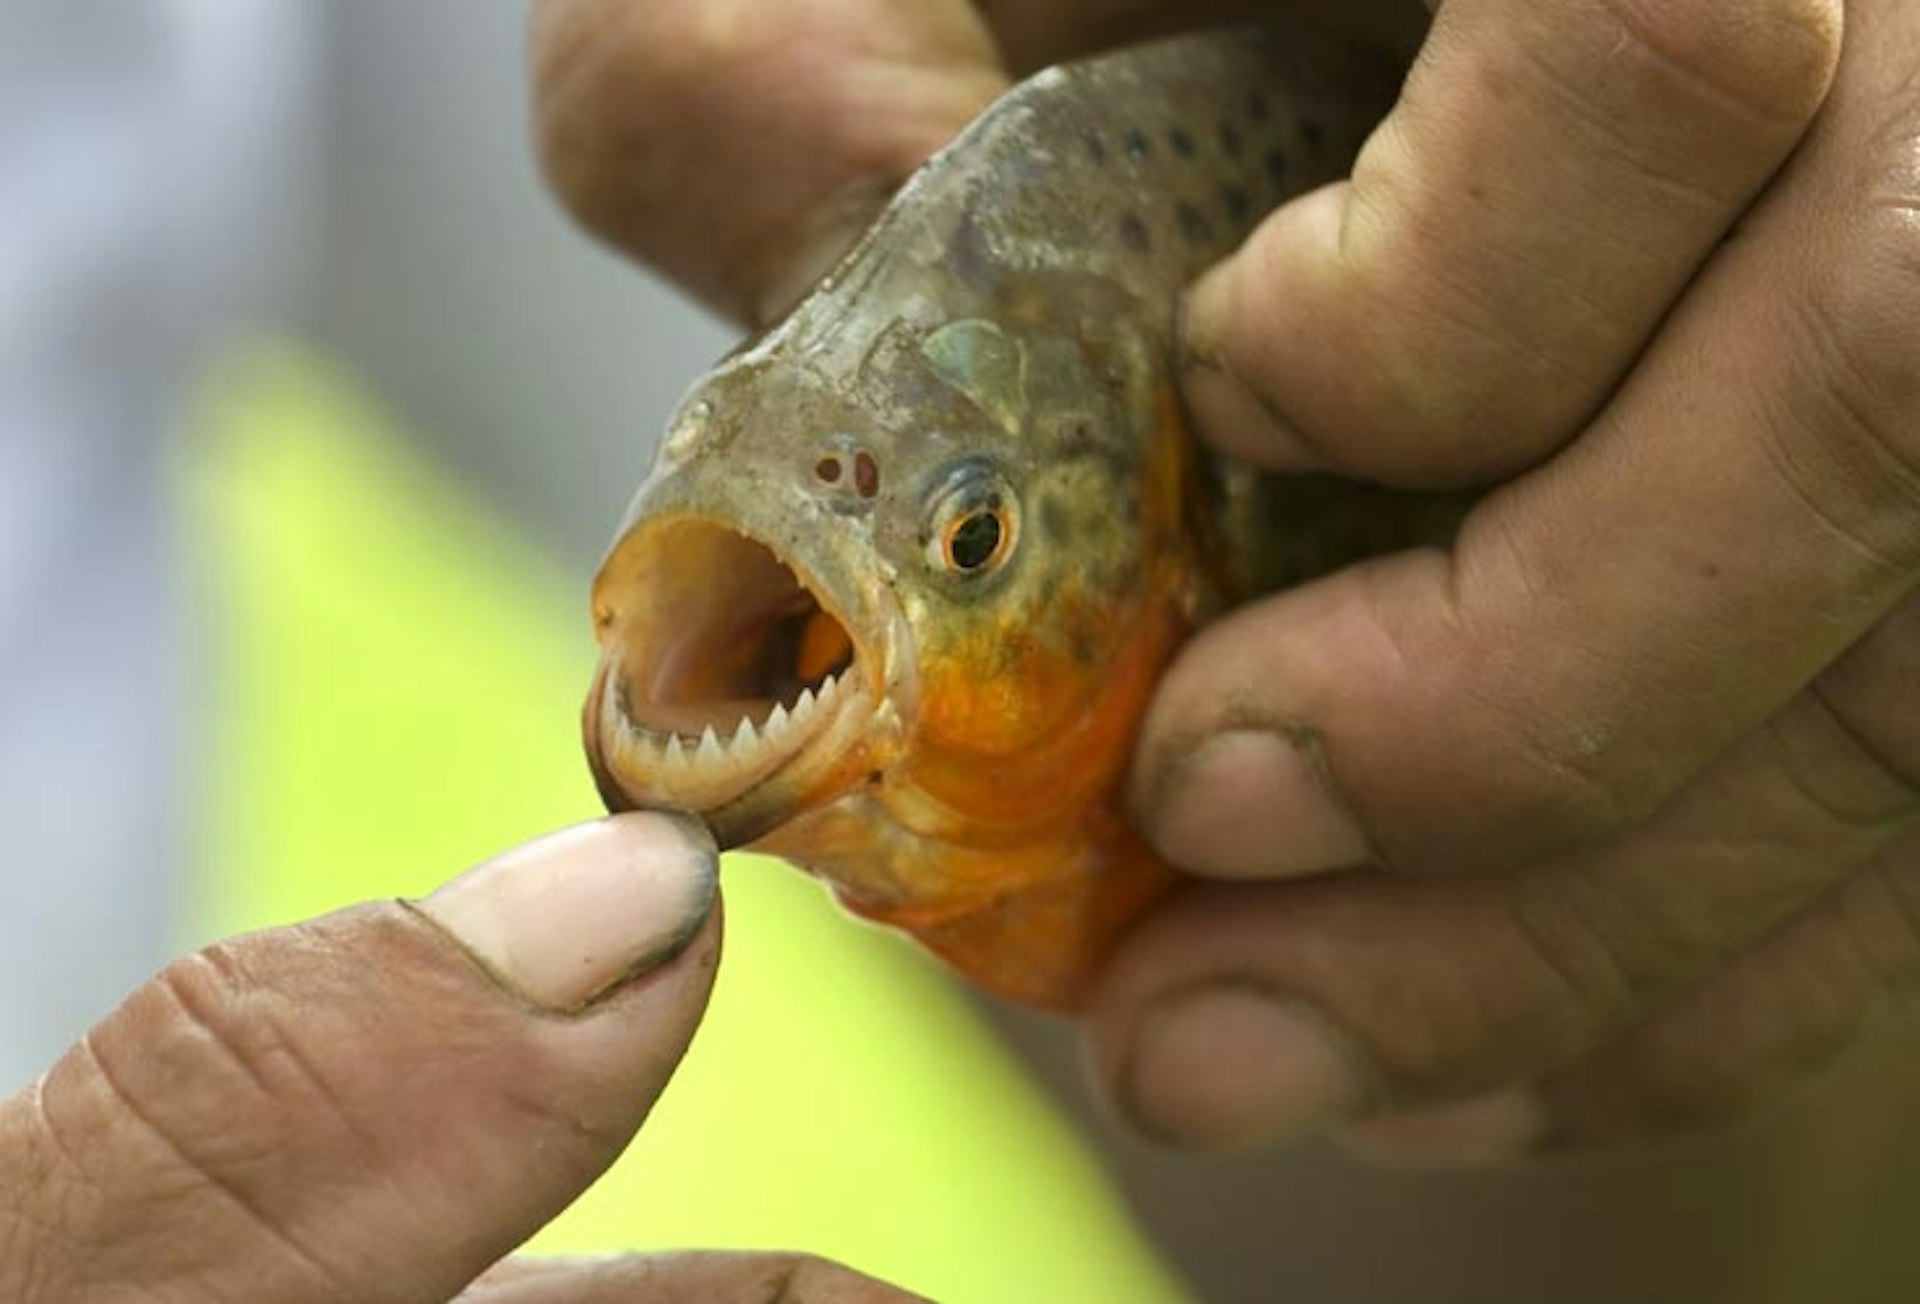 Careful, they bite back: admiring a nice set of chompers on an Amazonian piranha. Image by David Parsons / E+ / Getty Images